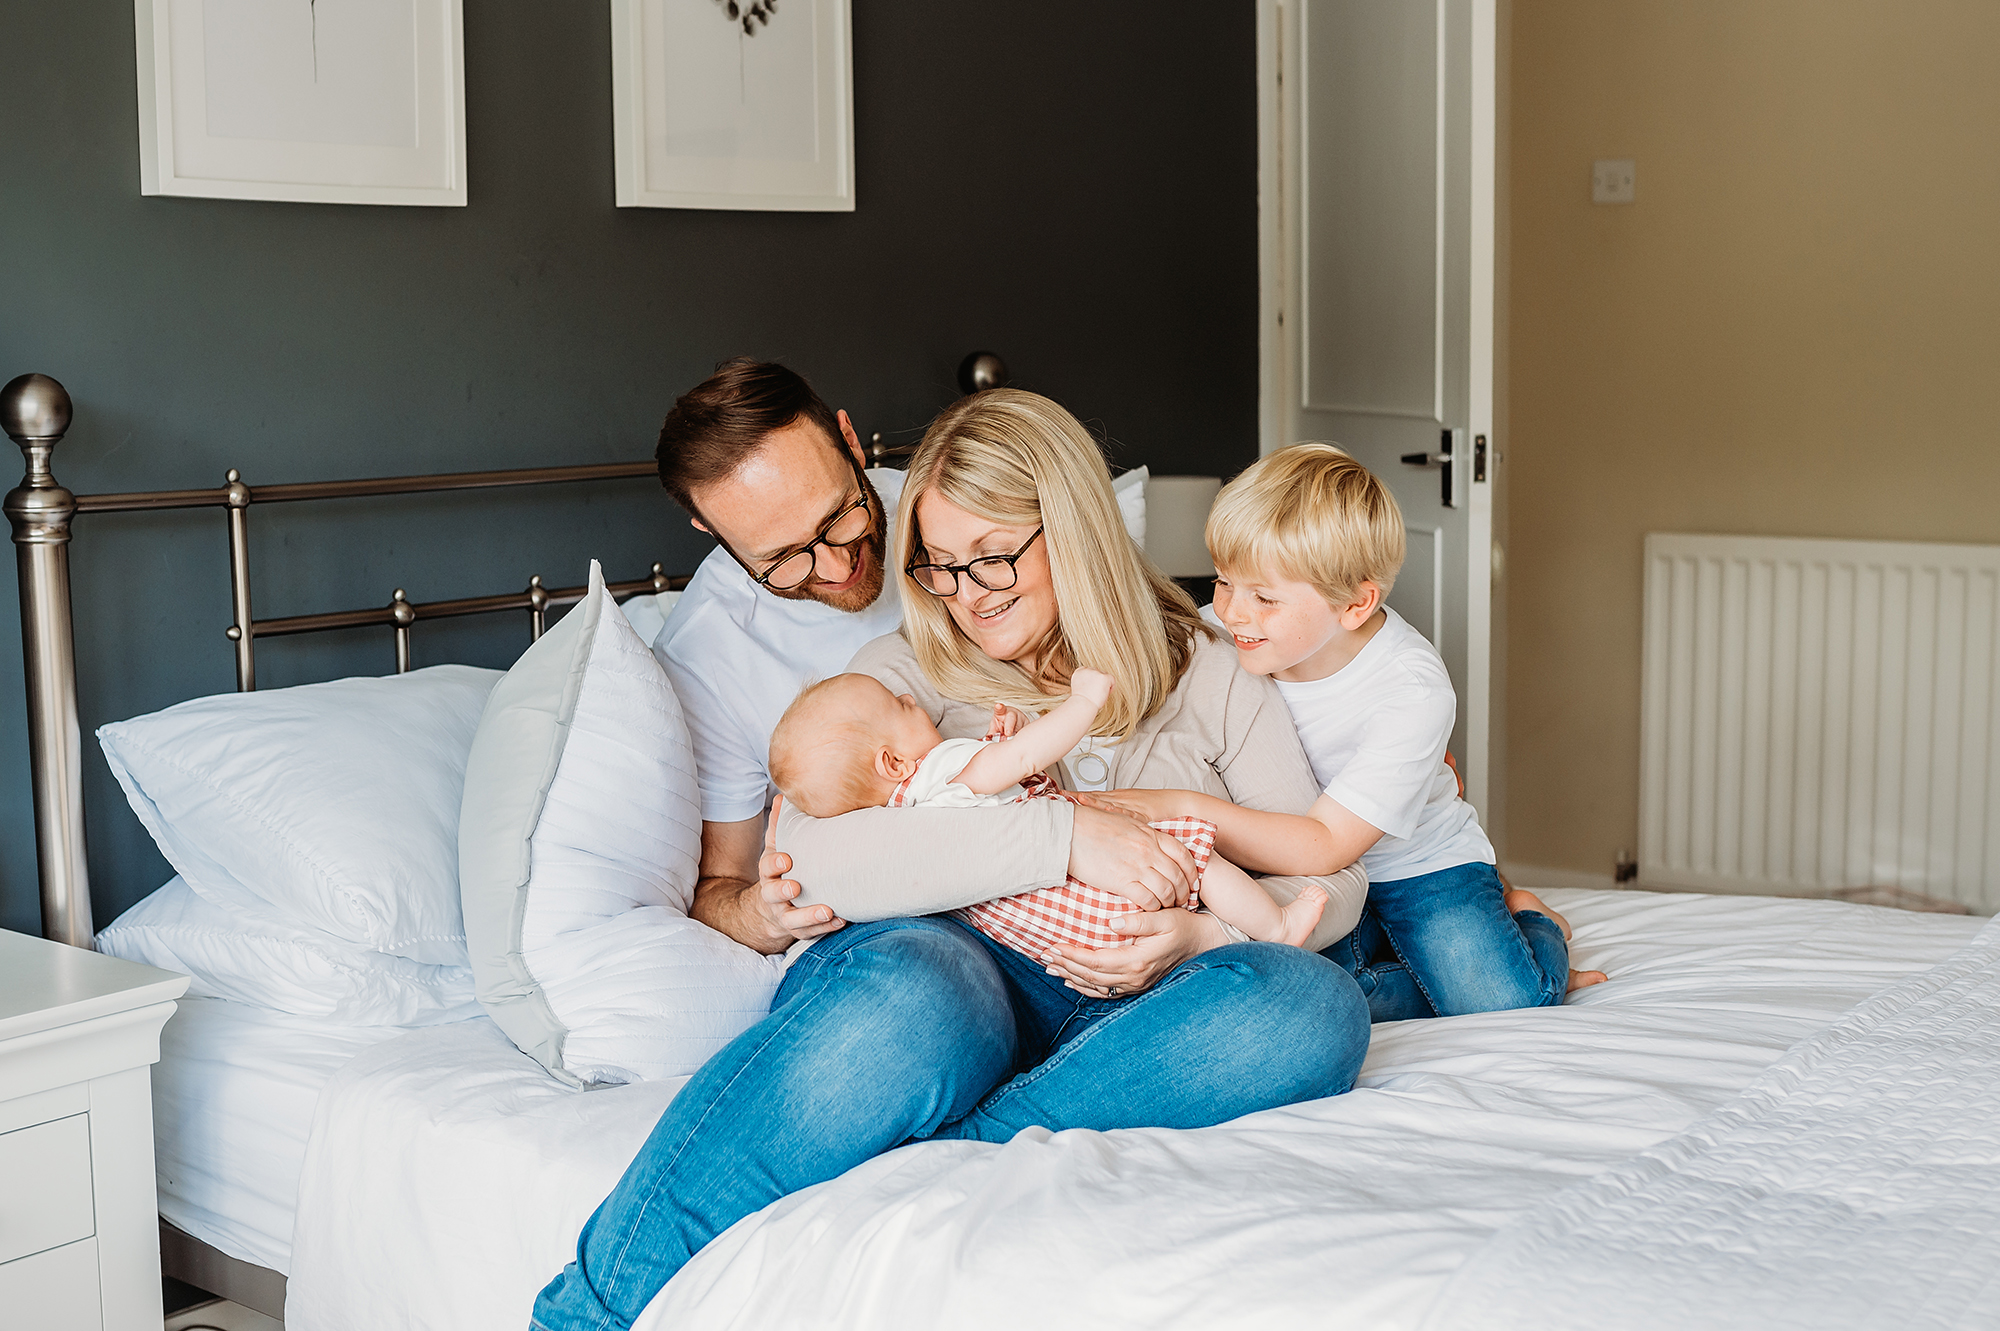 lifestyle newborn photographer, with parents and brother cuddling baby